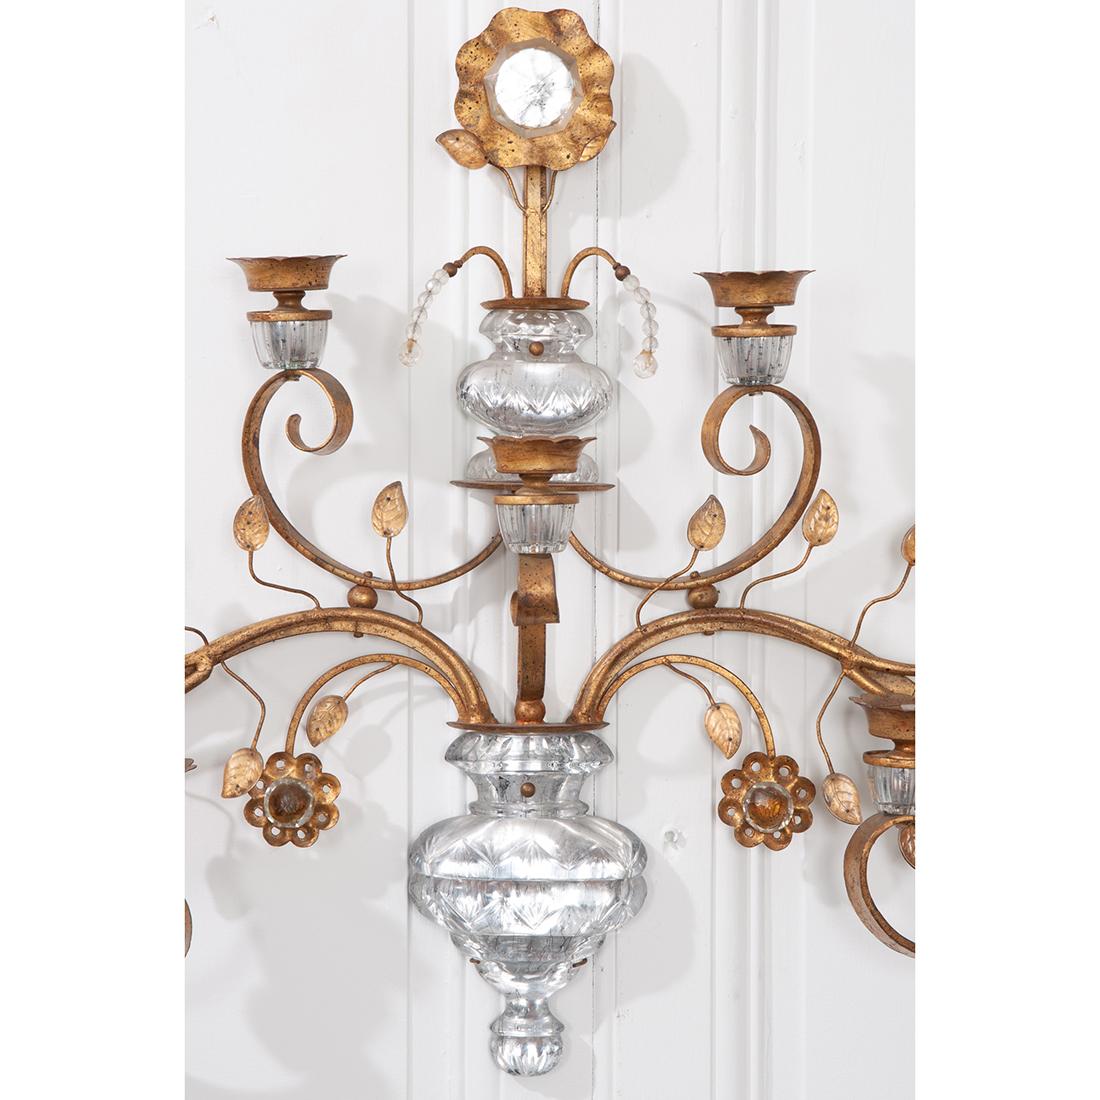 This beautiful French 20th century sconce features a brass scroll design with crystal accents. The sconce has floral and foliate details with each leaf and flower having crystal embellishments. There are seven candle holders. Reproduction. 
 